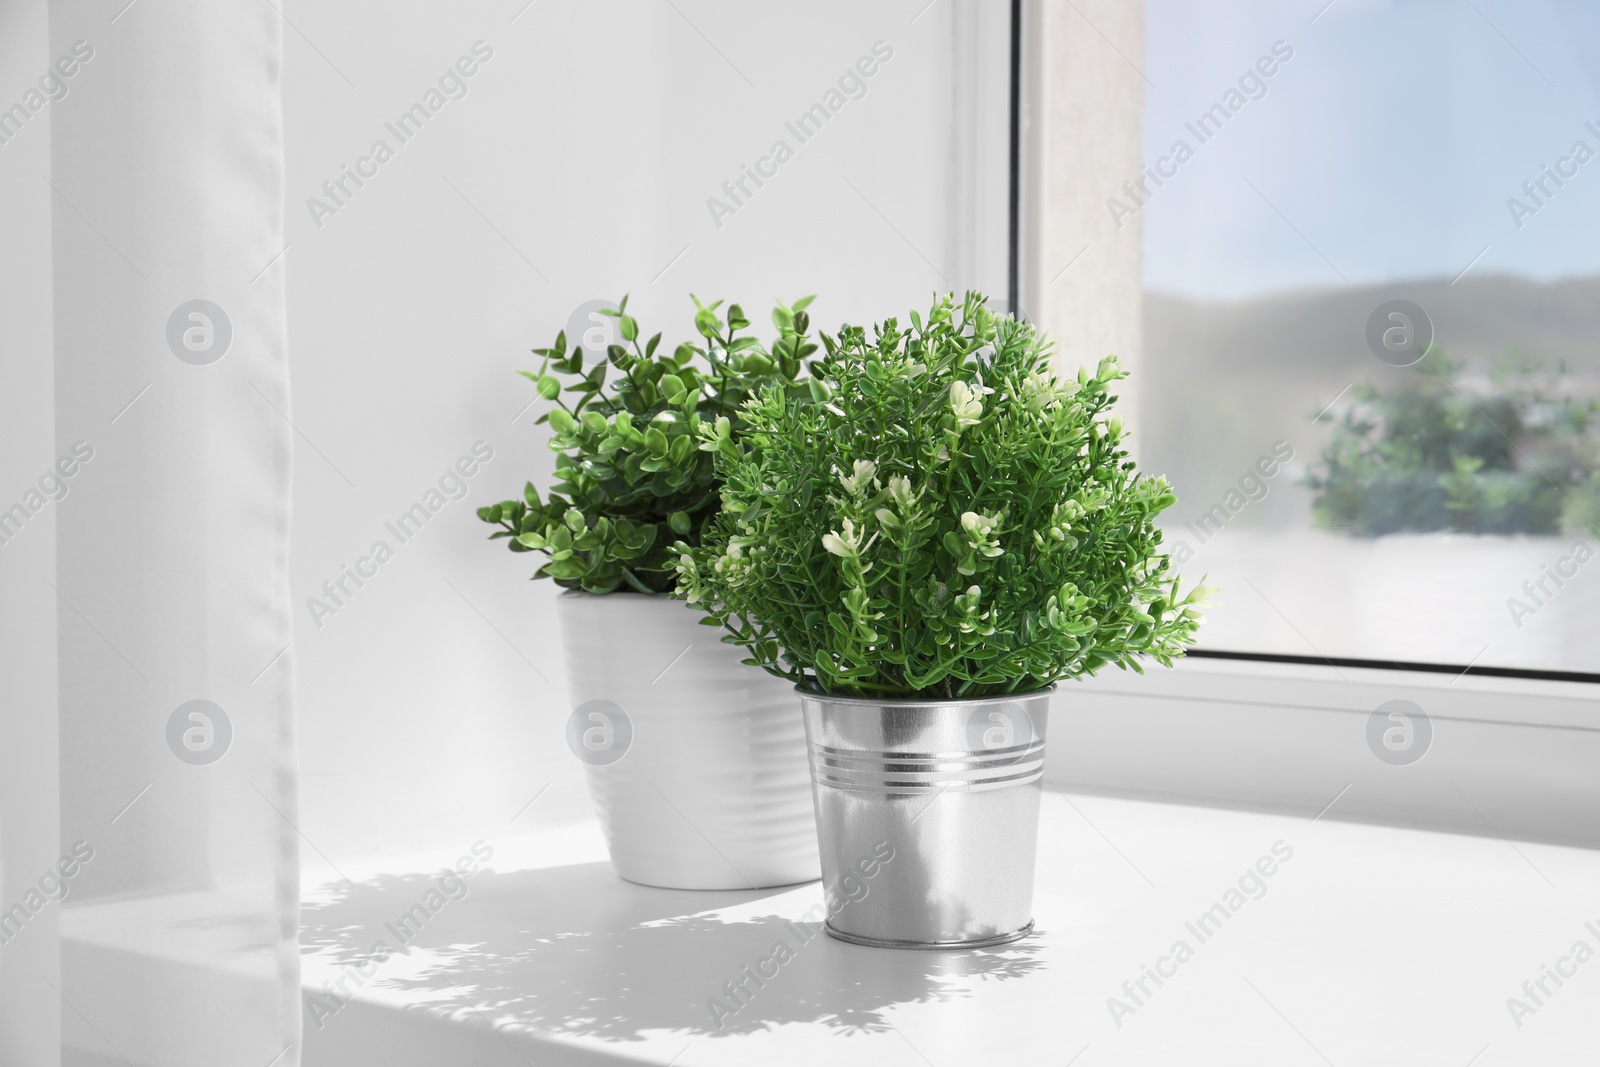 Photo of Artificial potted herbs on sunny day on windowsill indoors. Home decor